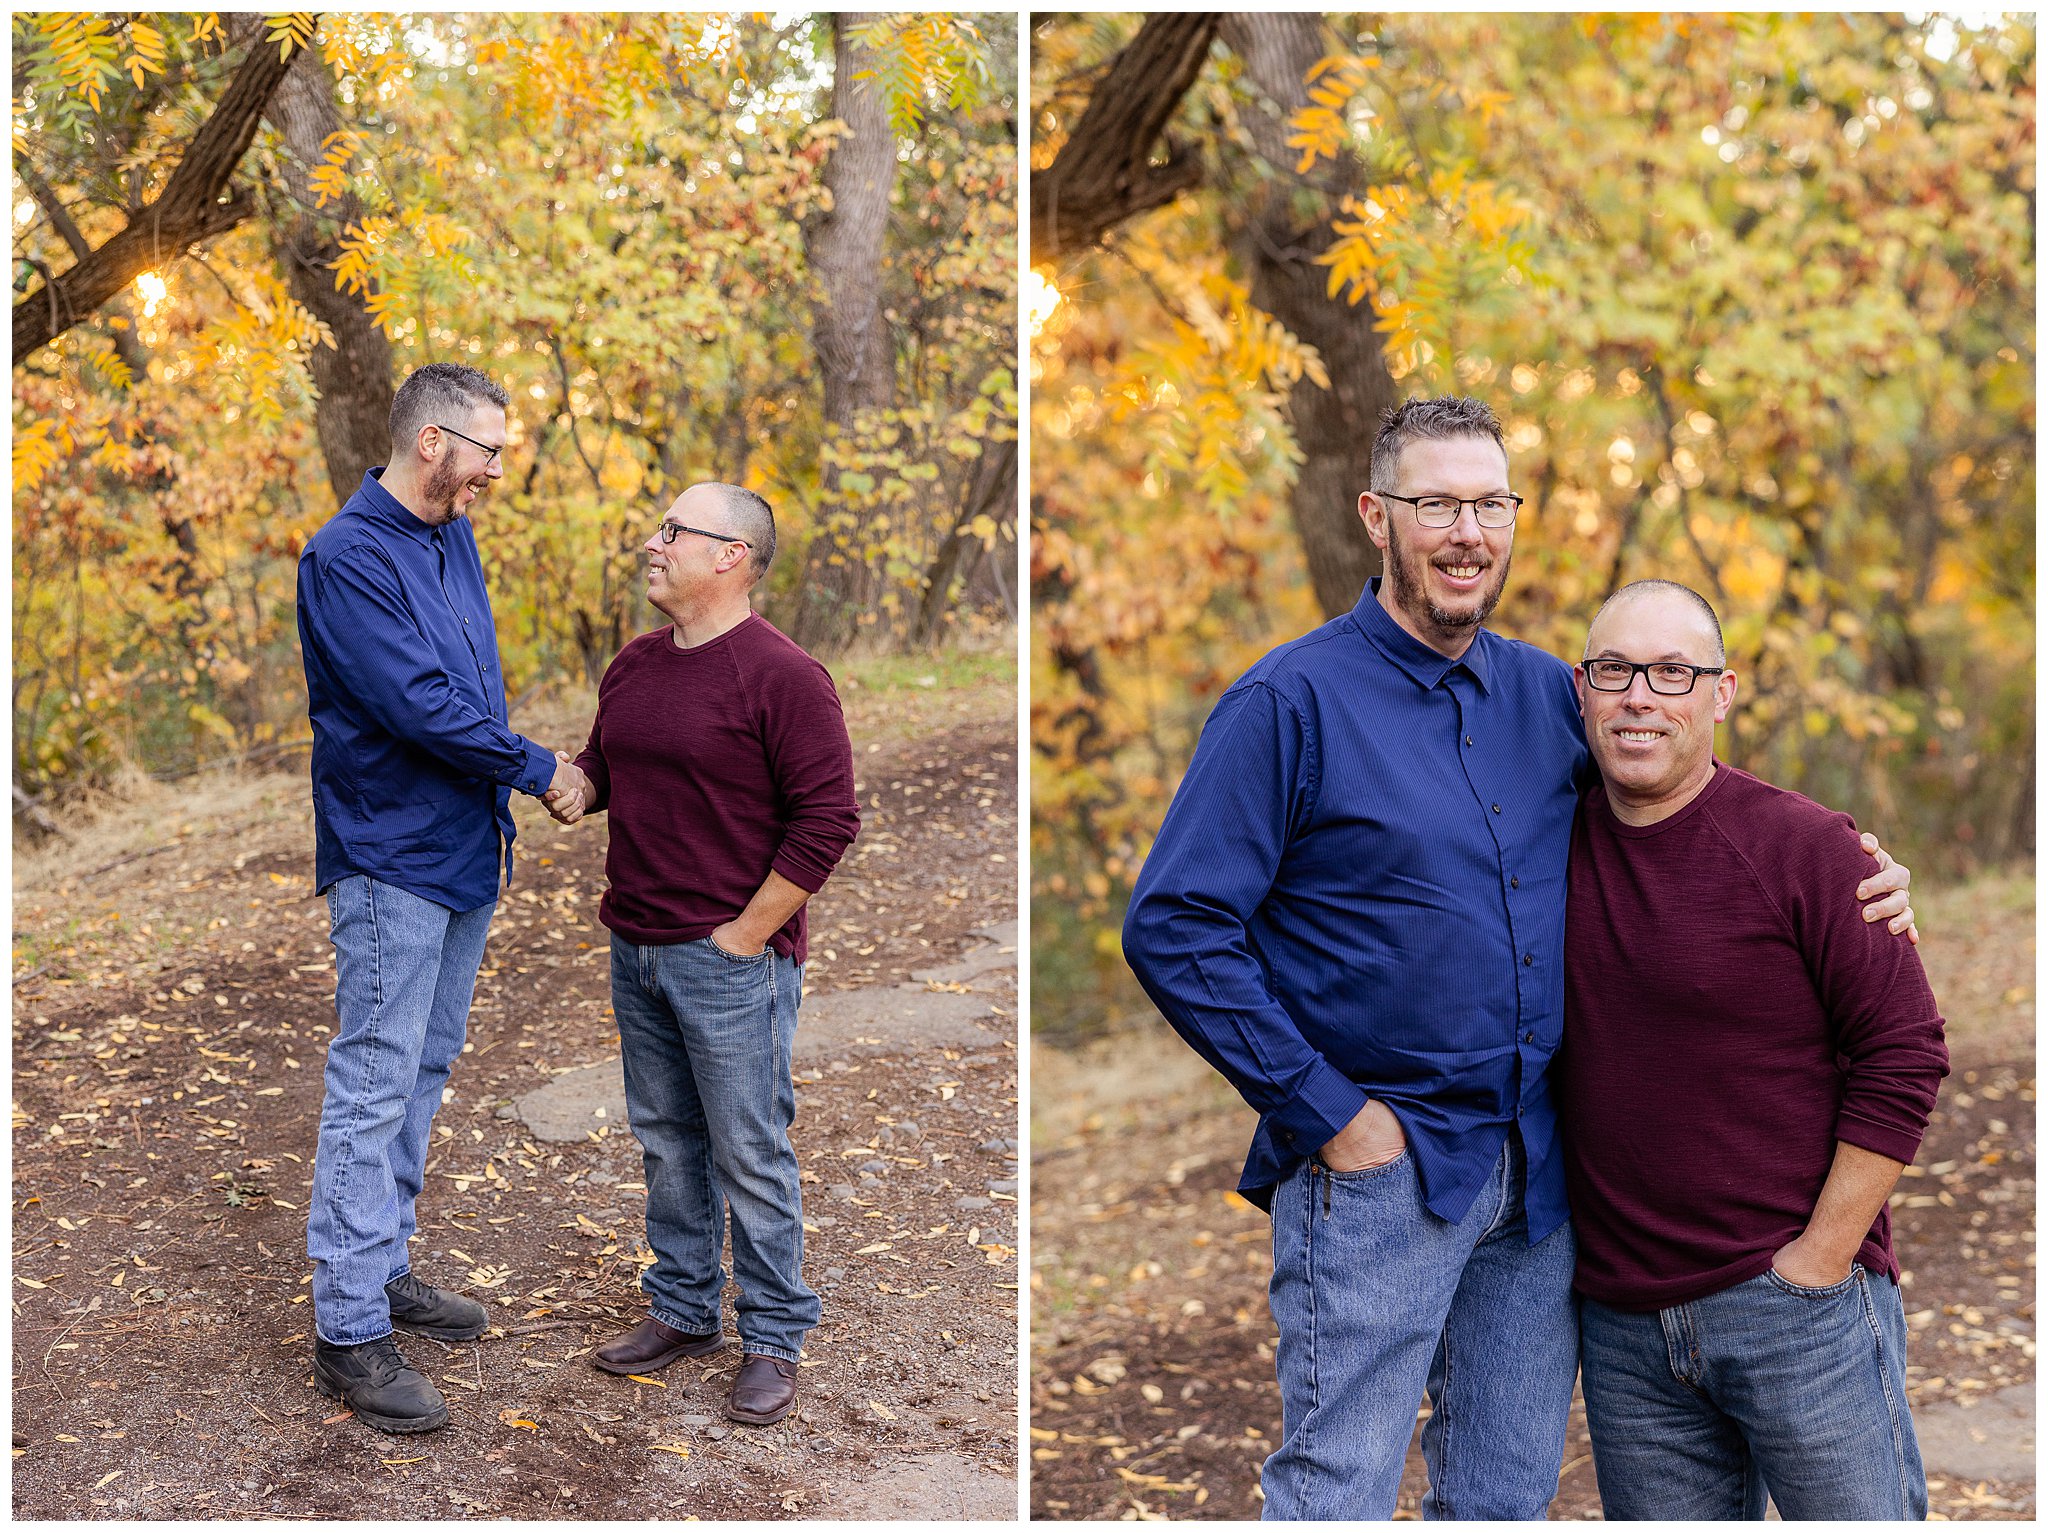 Upper Bidwell Park Large Extended Family Session Chico CA Fall November Grandparents Great Grandparents Siblings Cousins,